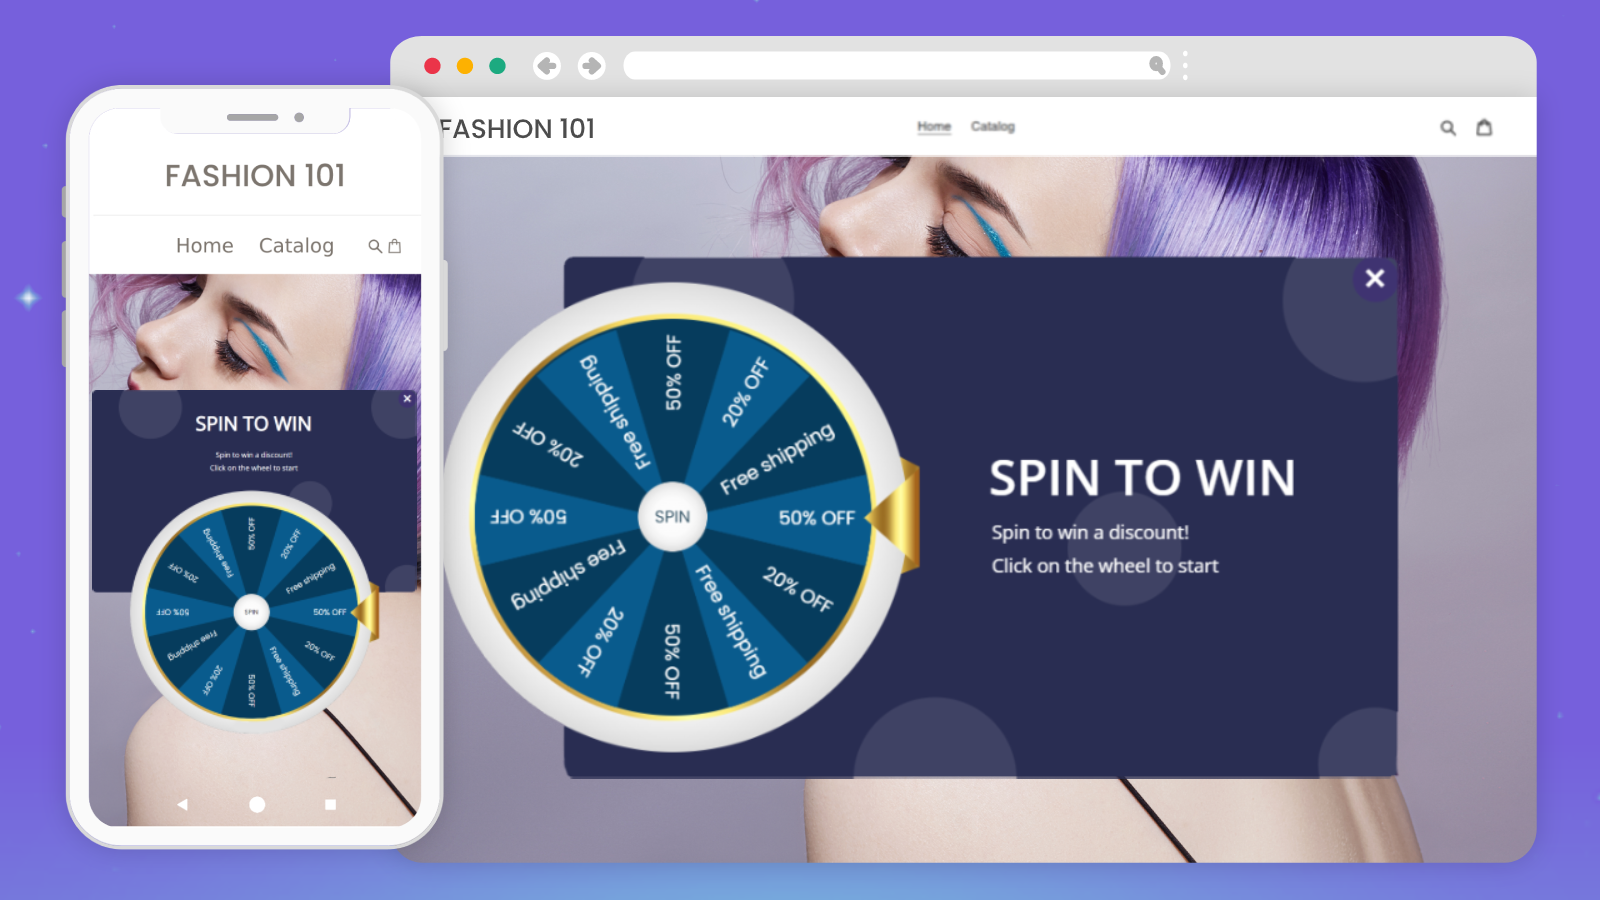 Spin the wheel pop up - Spin to win